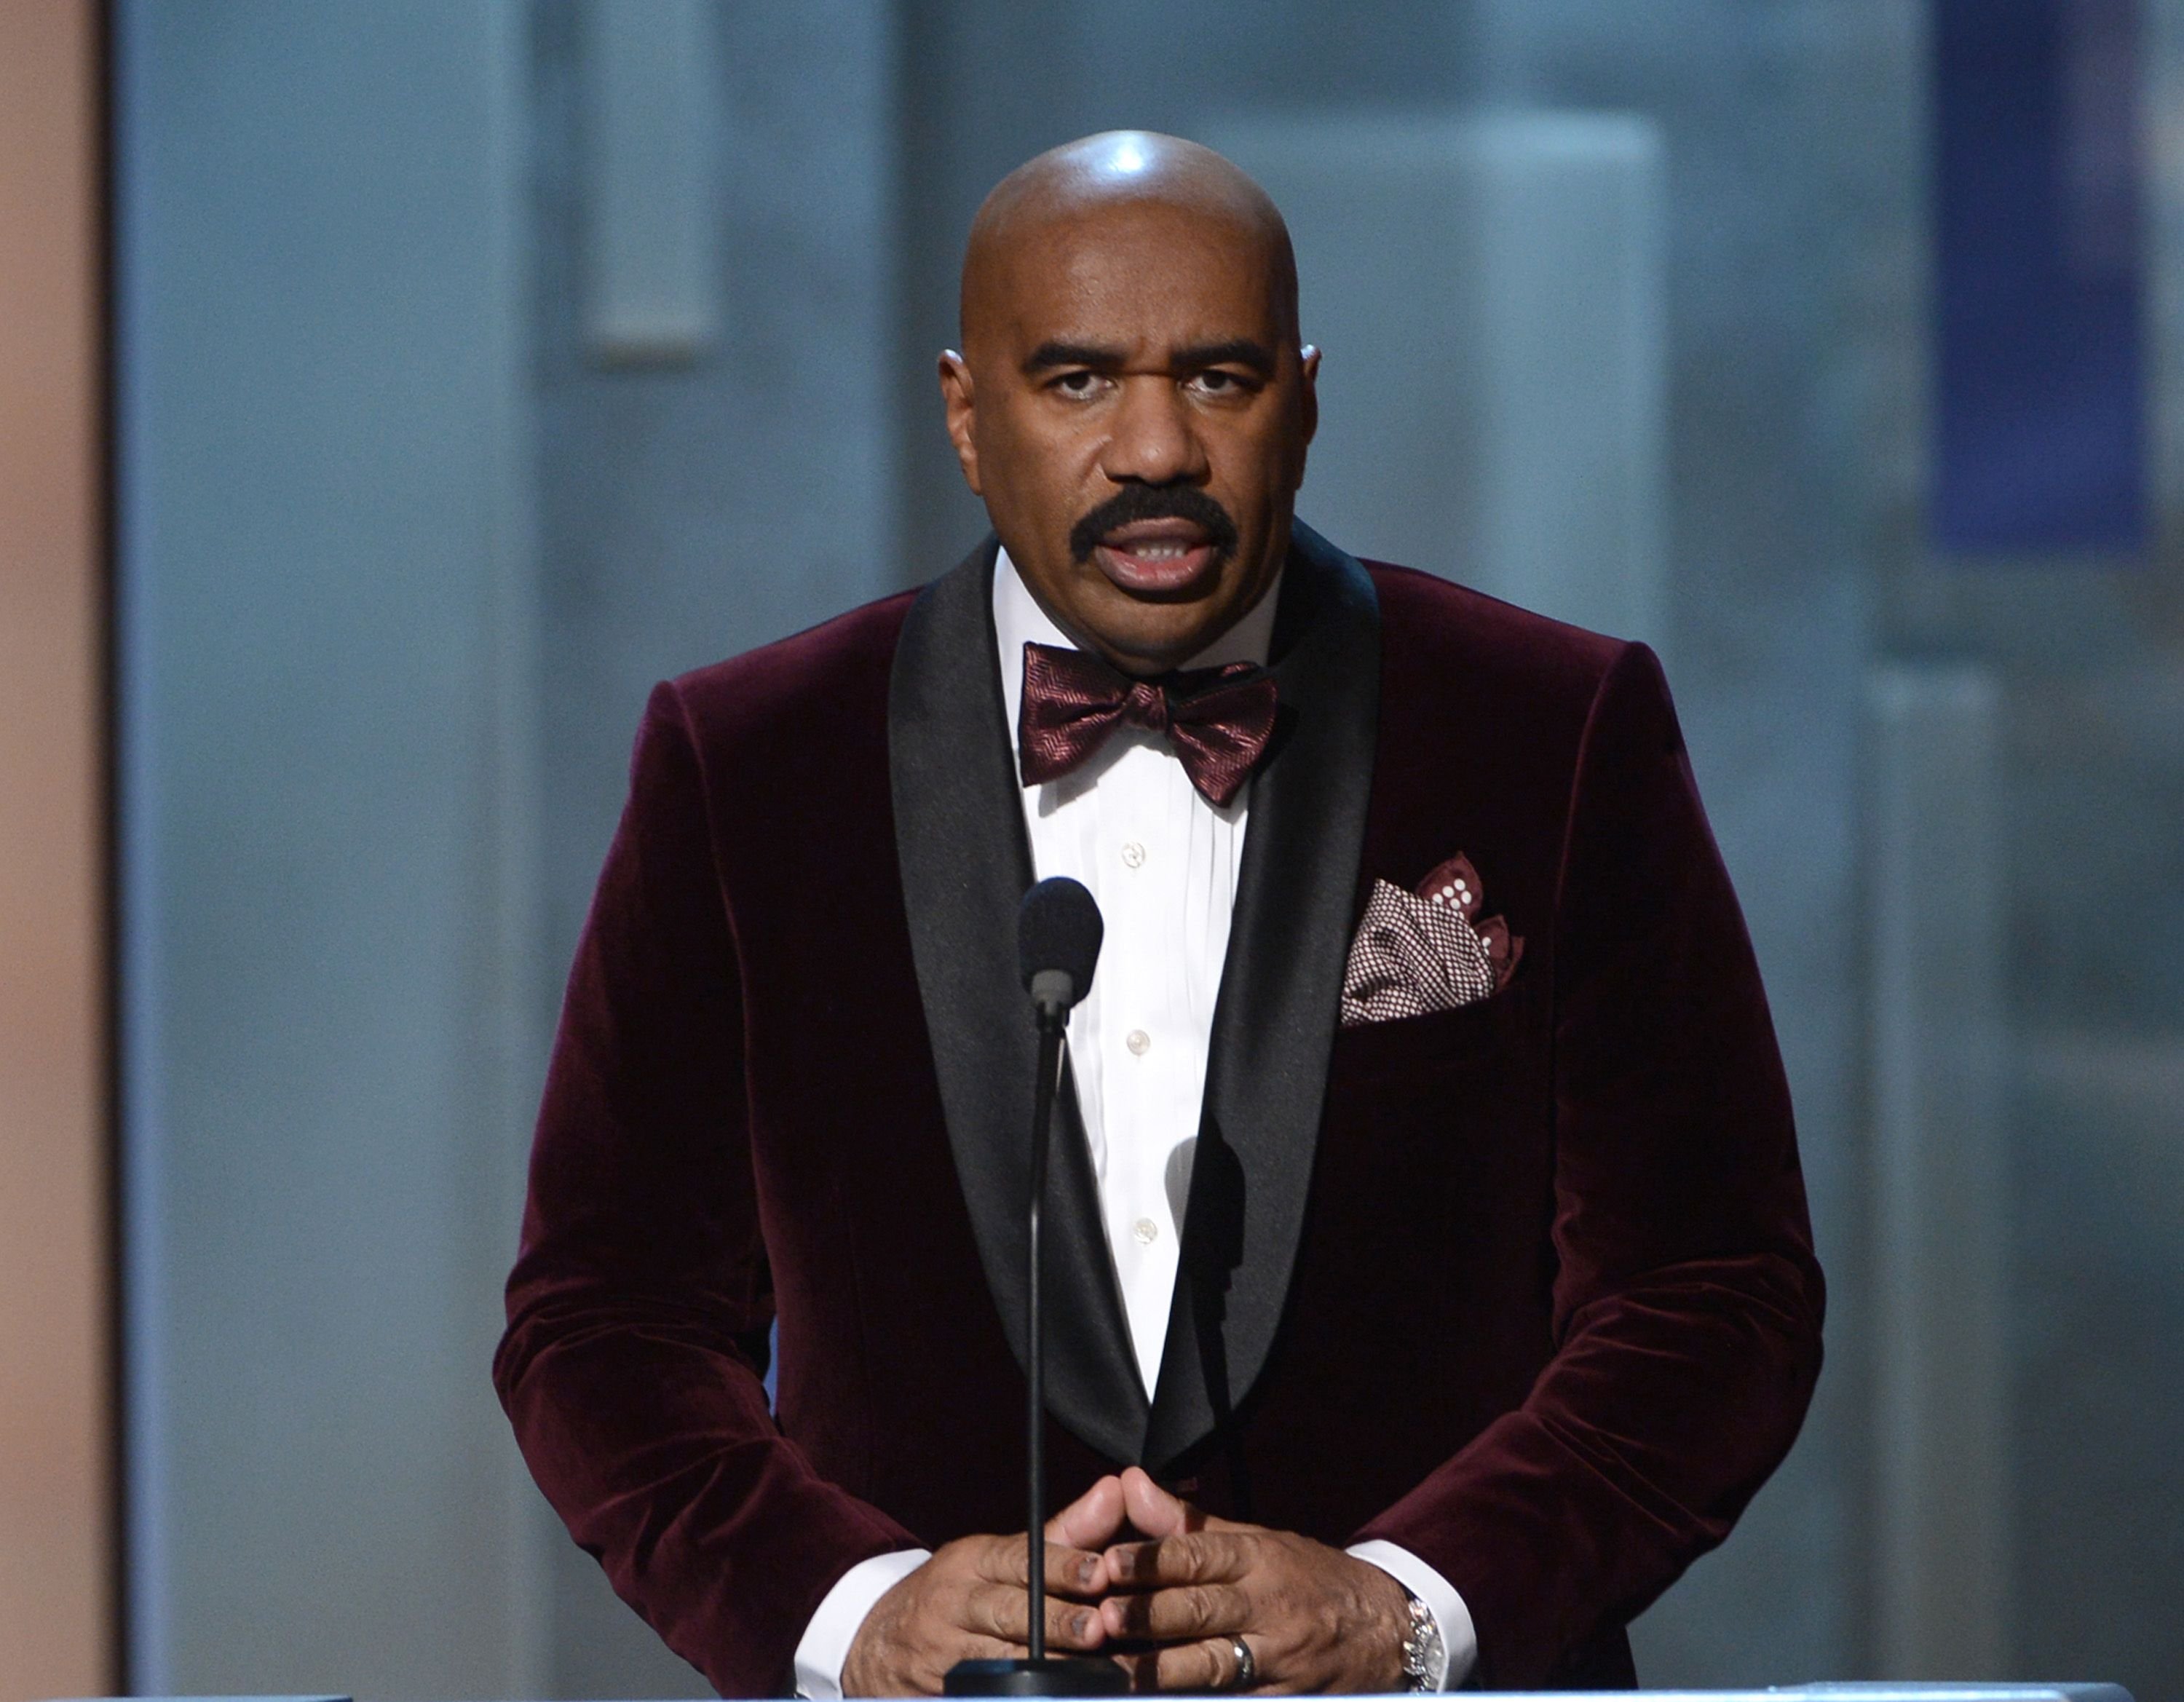 Watch Steve Harvey's Surprise after a 'Family Feud' Contesta...